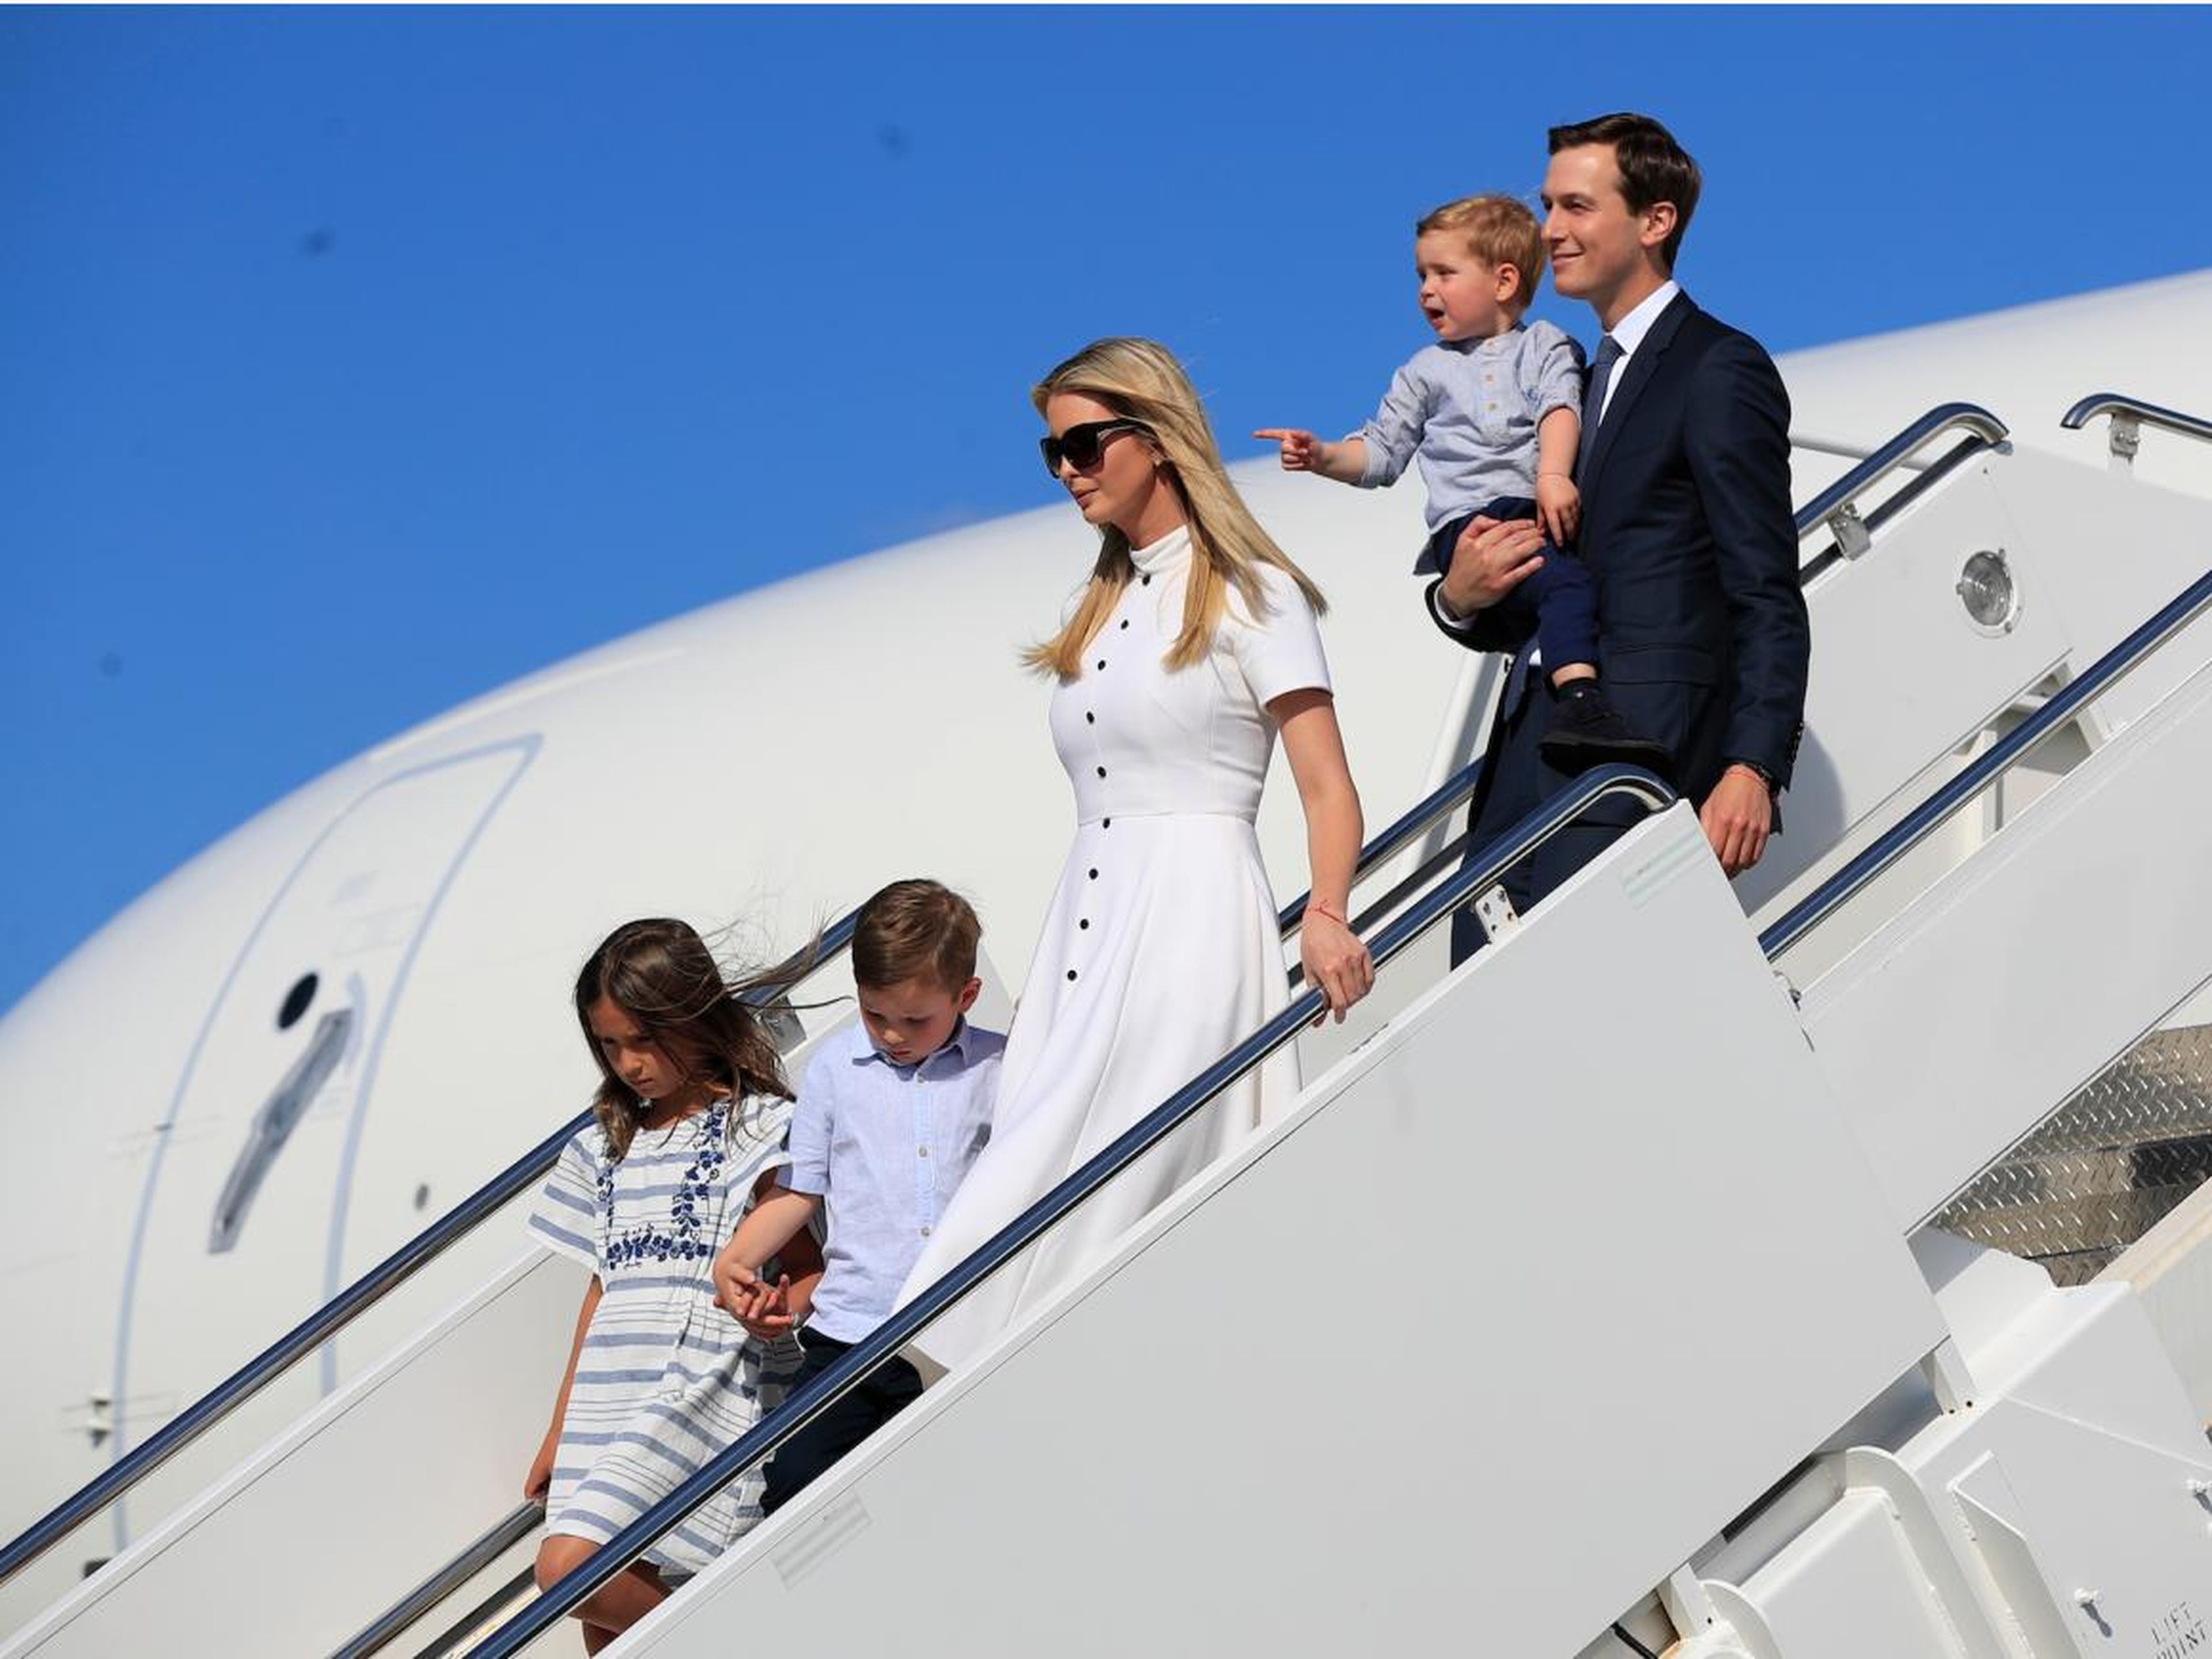 Ivanka Trump's and husband Jared Kushner's combined assets are worth at least $207 million, but could exceed $762 million, according to the documents.